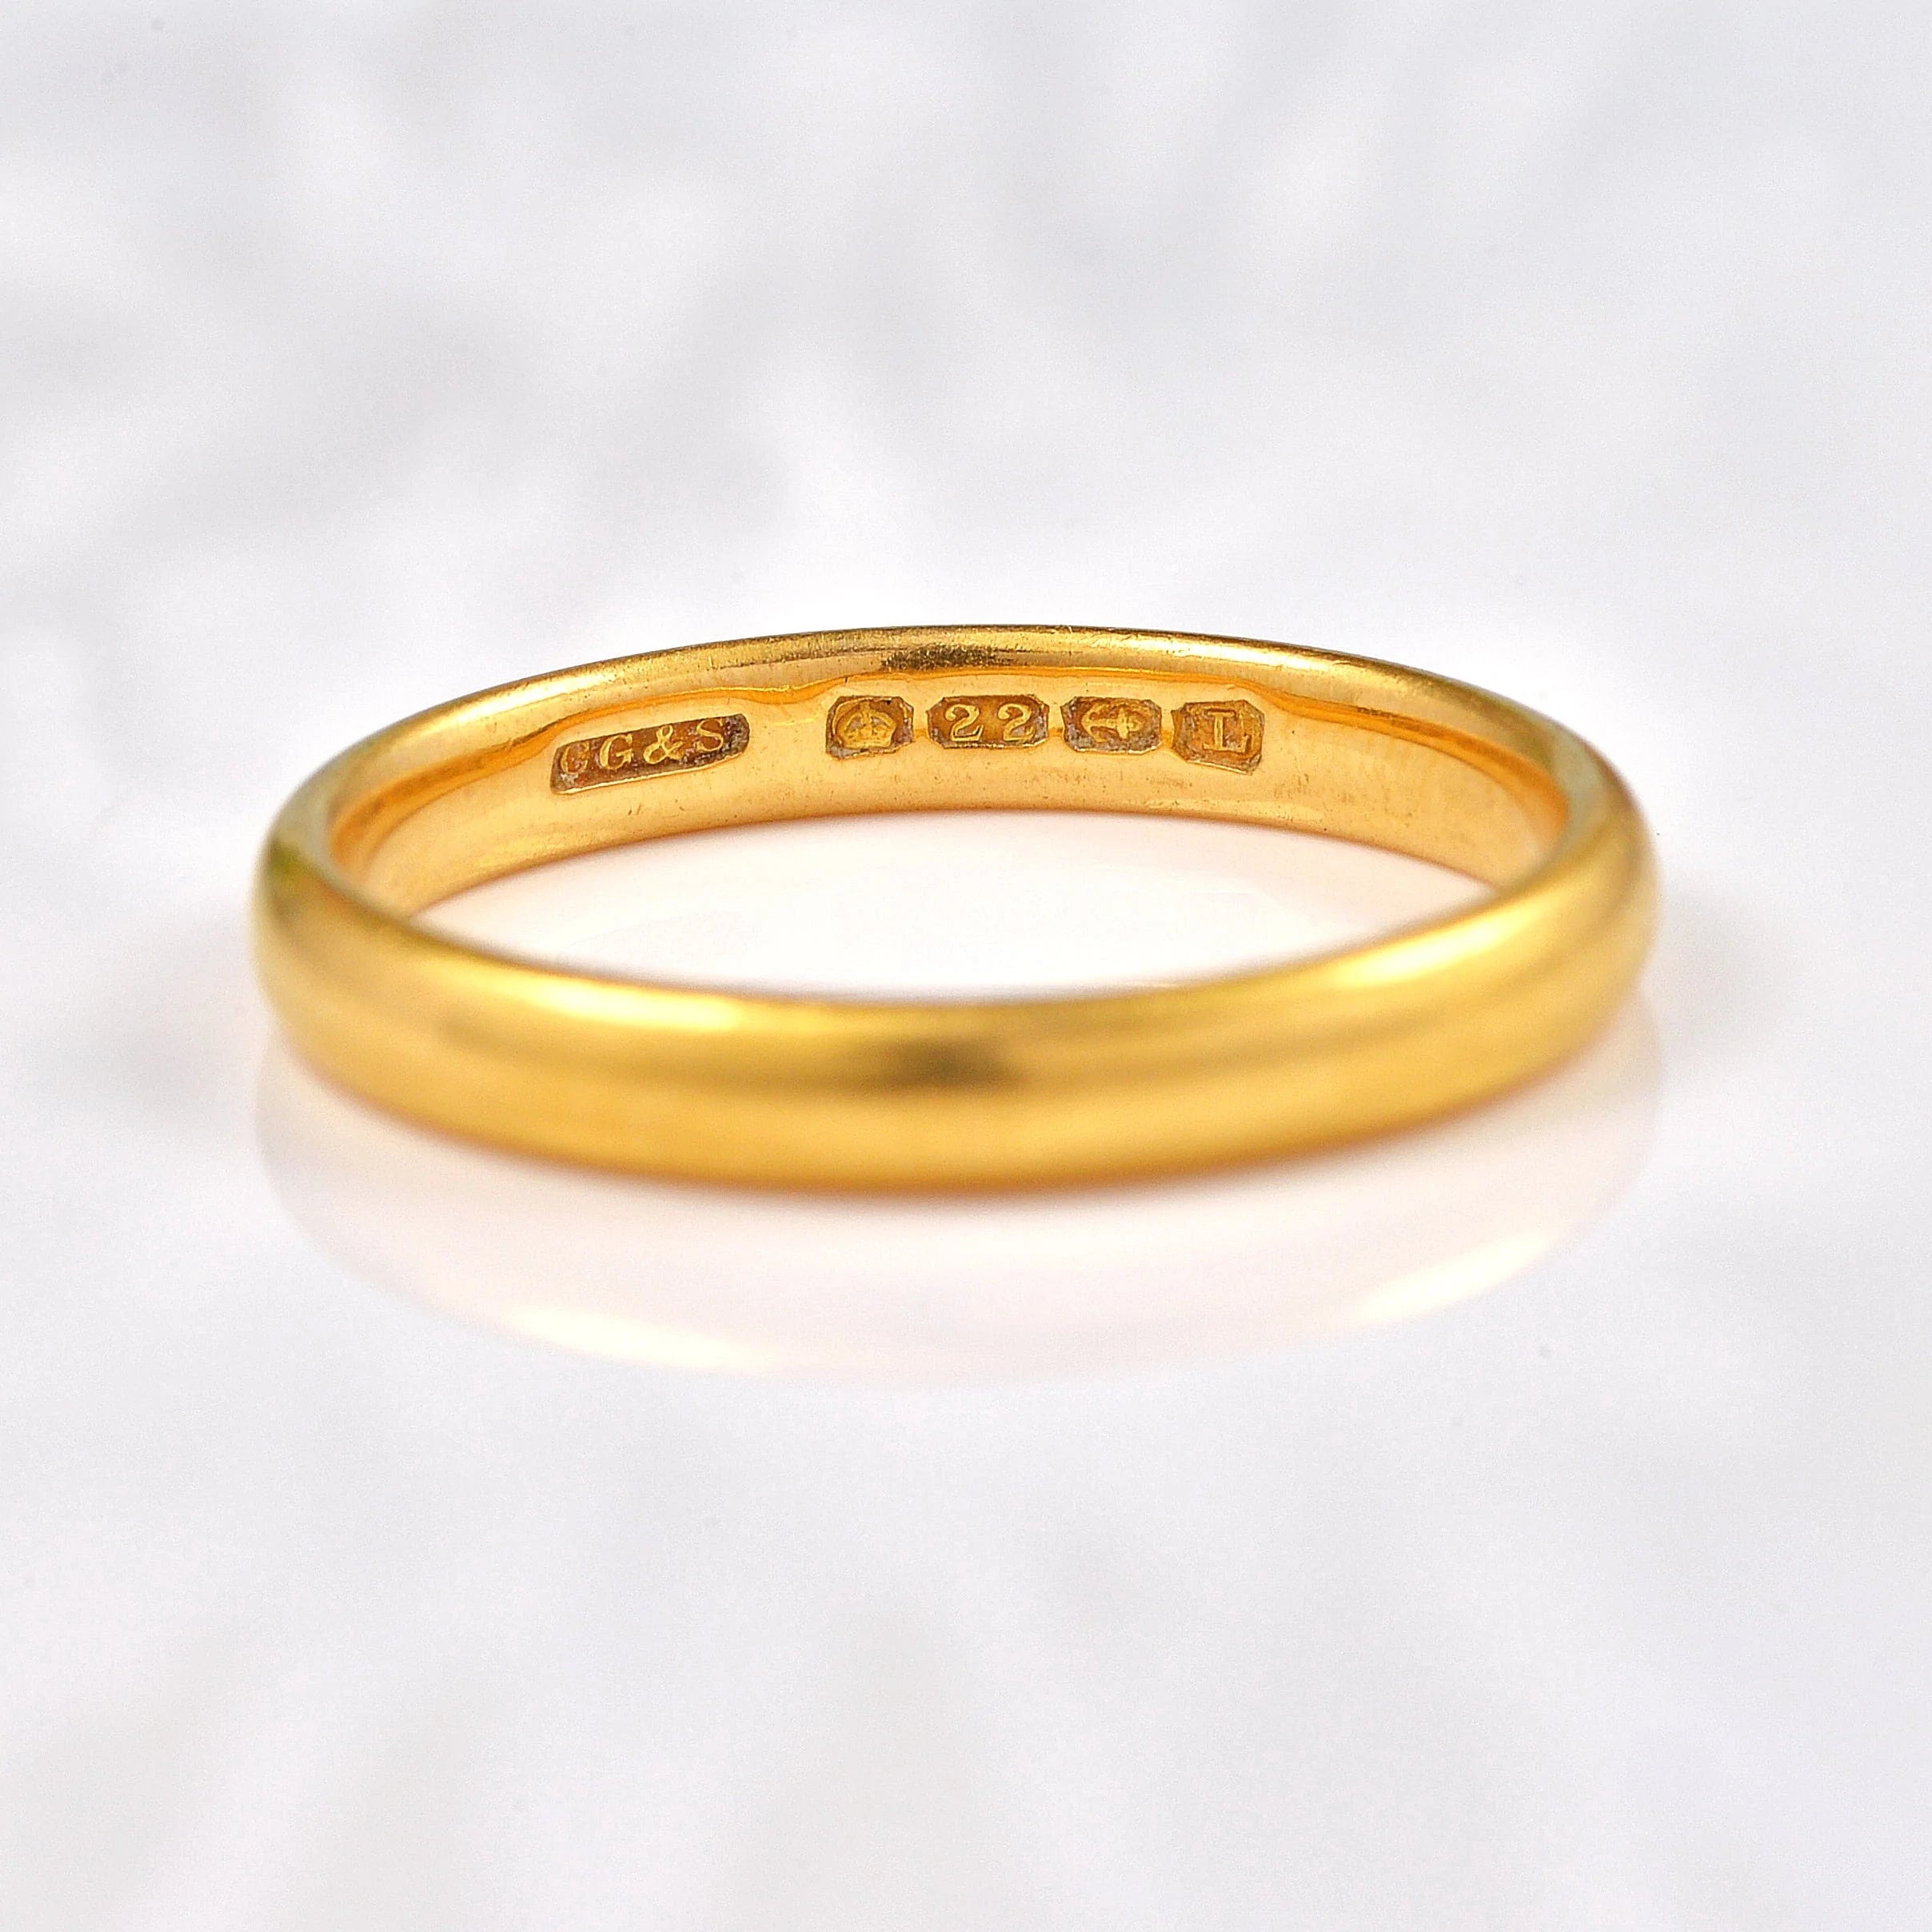 Ellibelle Jewellery Antique 22ct Gold Wedding Band - Date 1935 (4.1g)